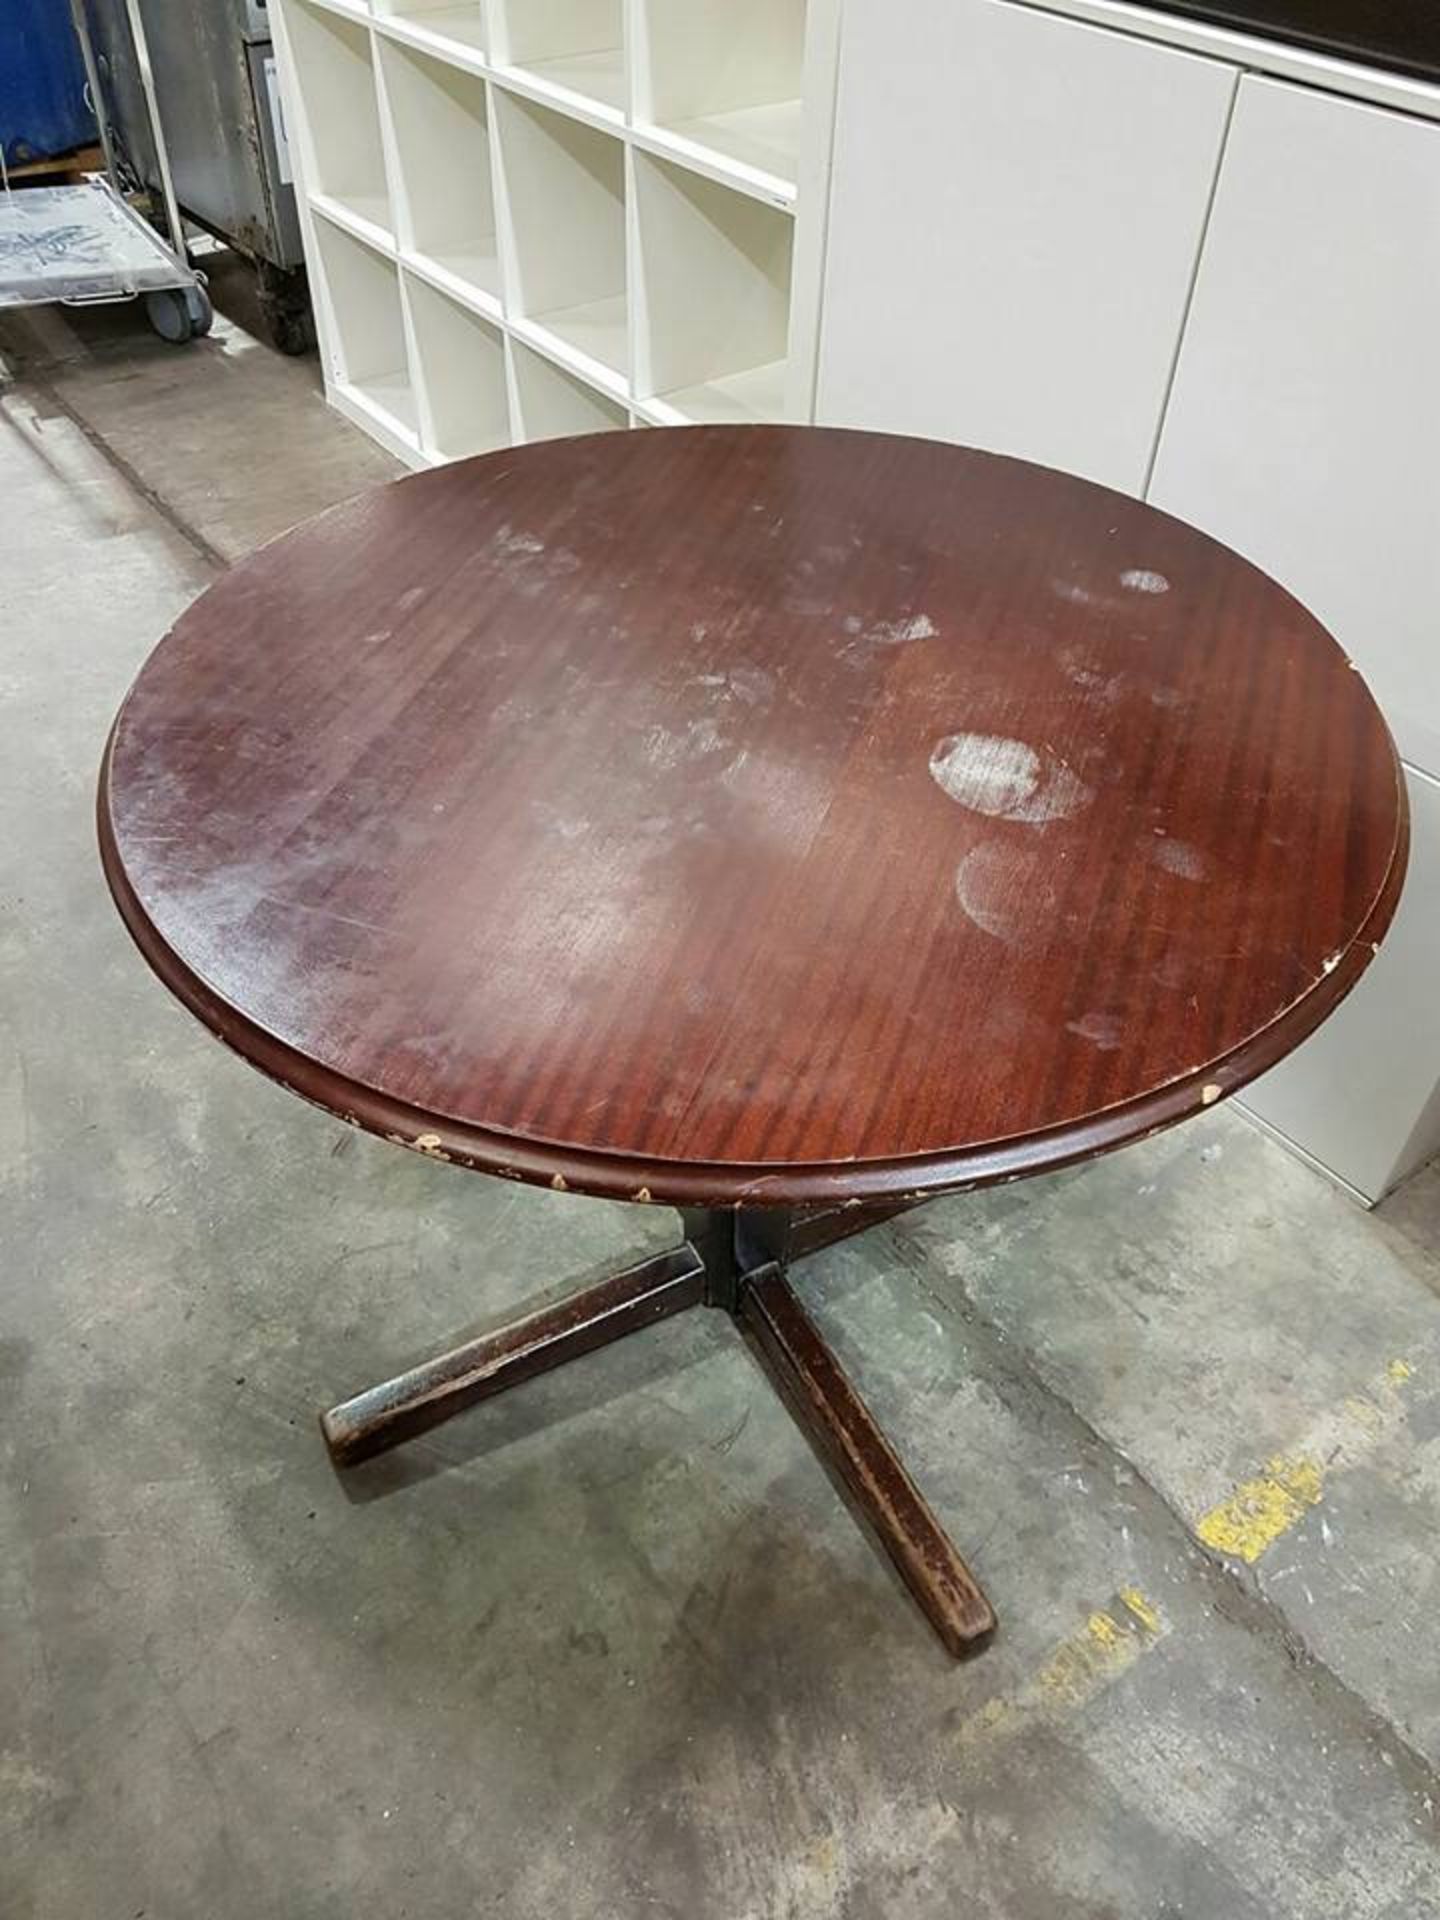 2 x round dining table 900mm diamter x 720mm tall